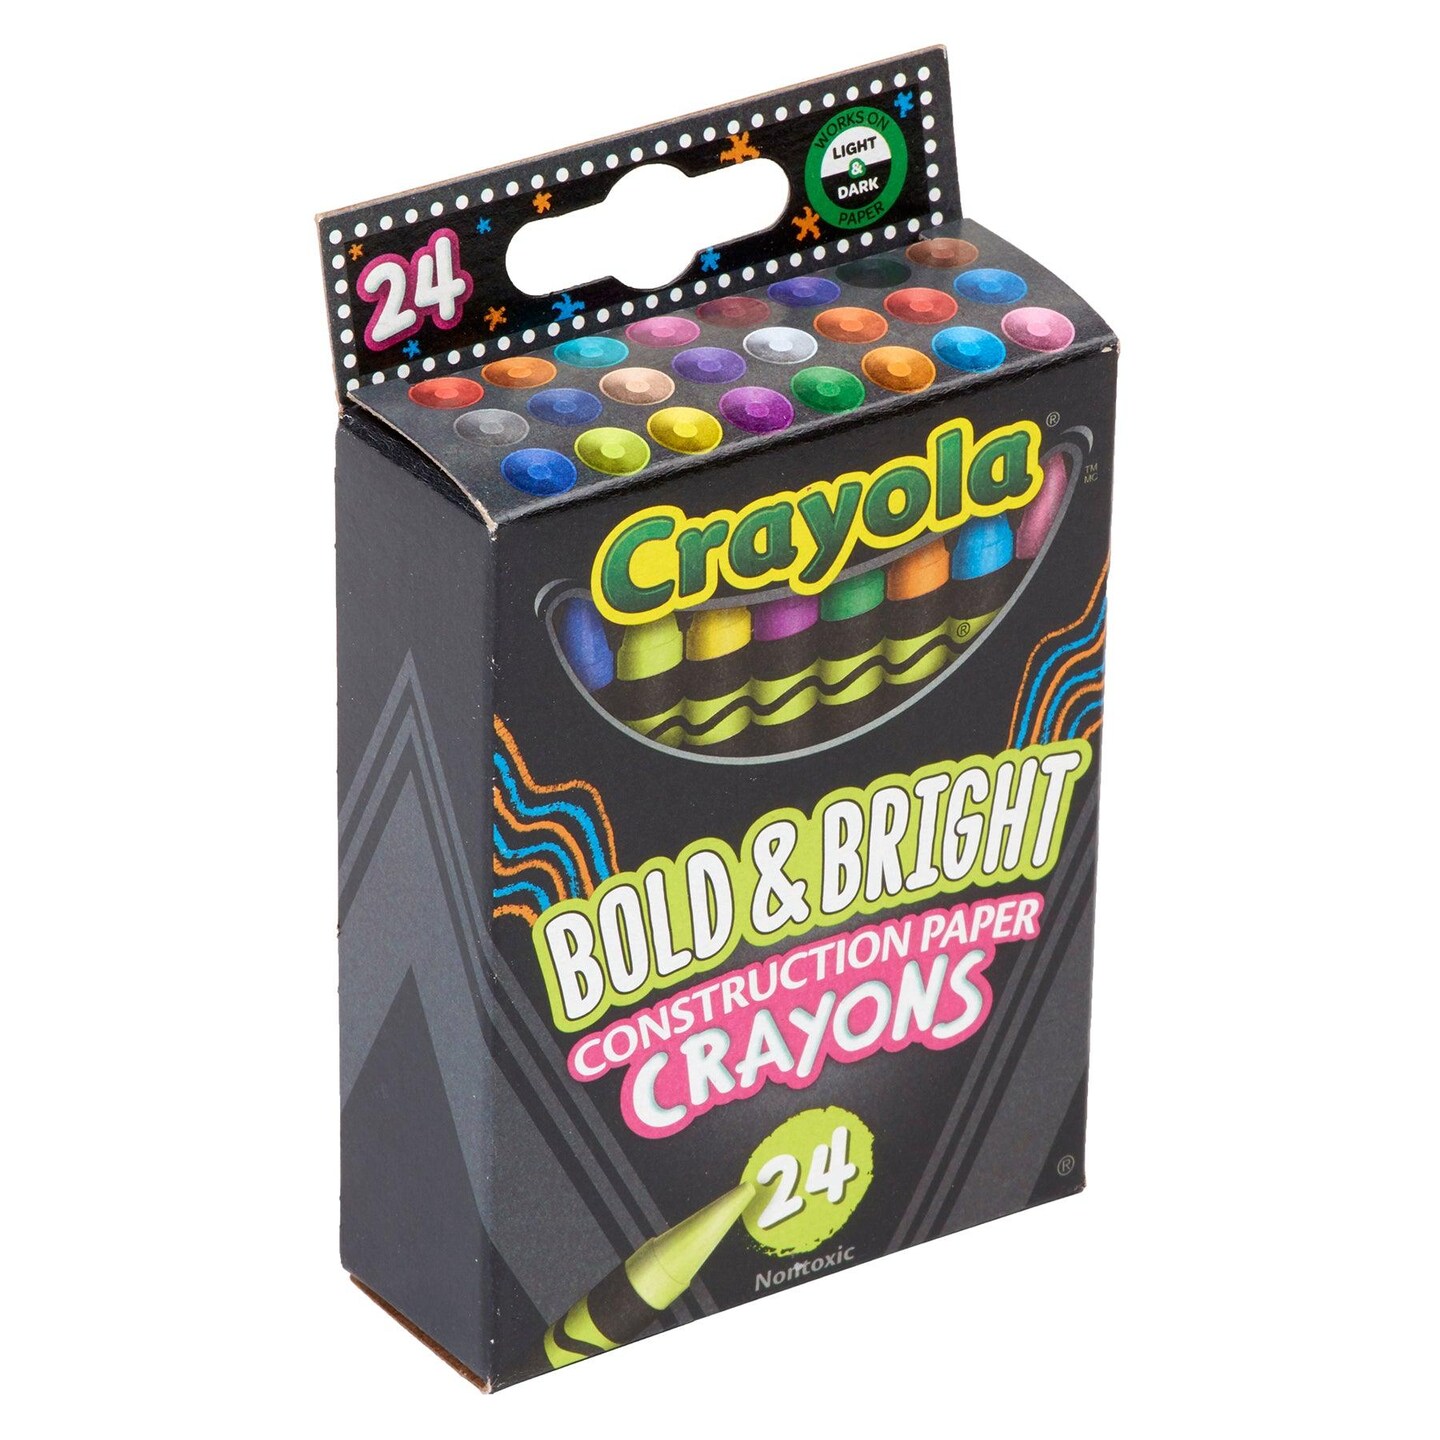 Bold &#x26; Bright Construction Paper Crayons, 24 Per Pack, 6 Packs